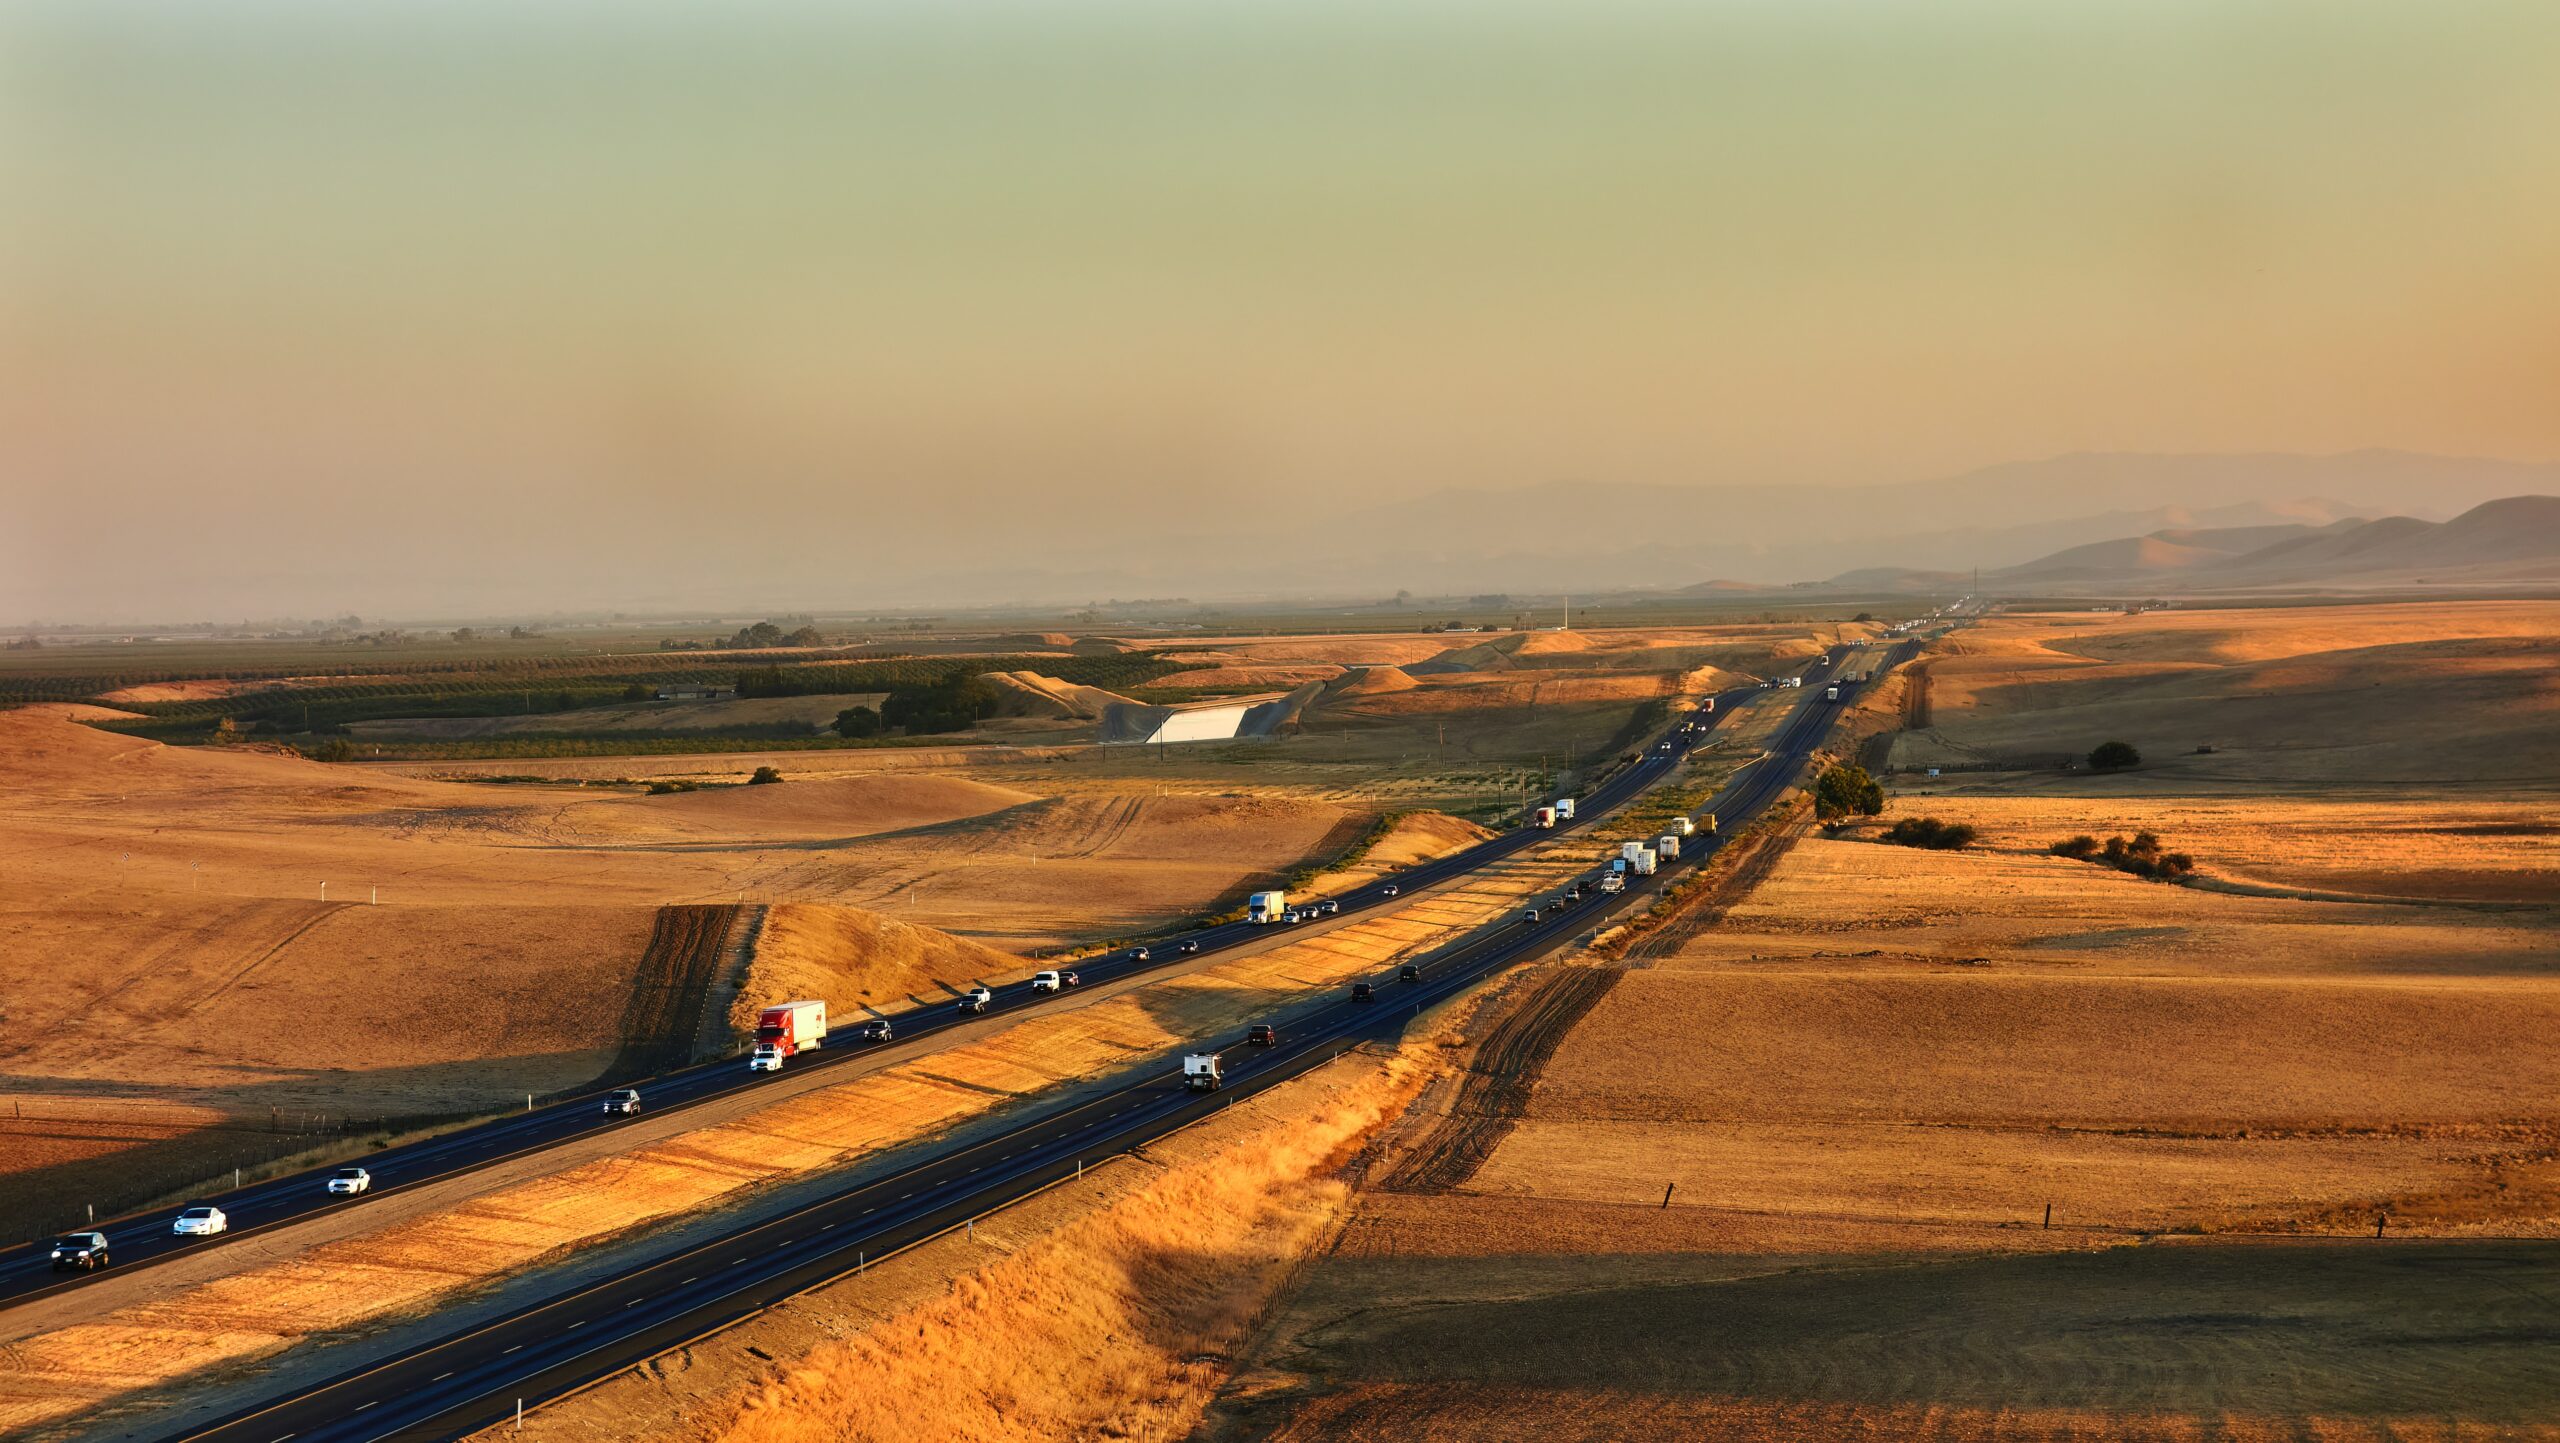 Image of trucks on a highway driving through a yellow field.